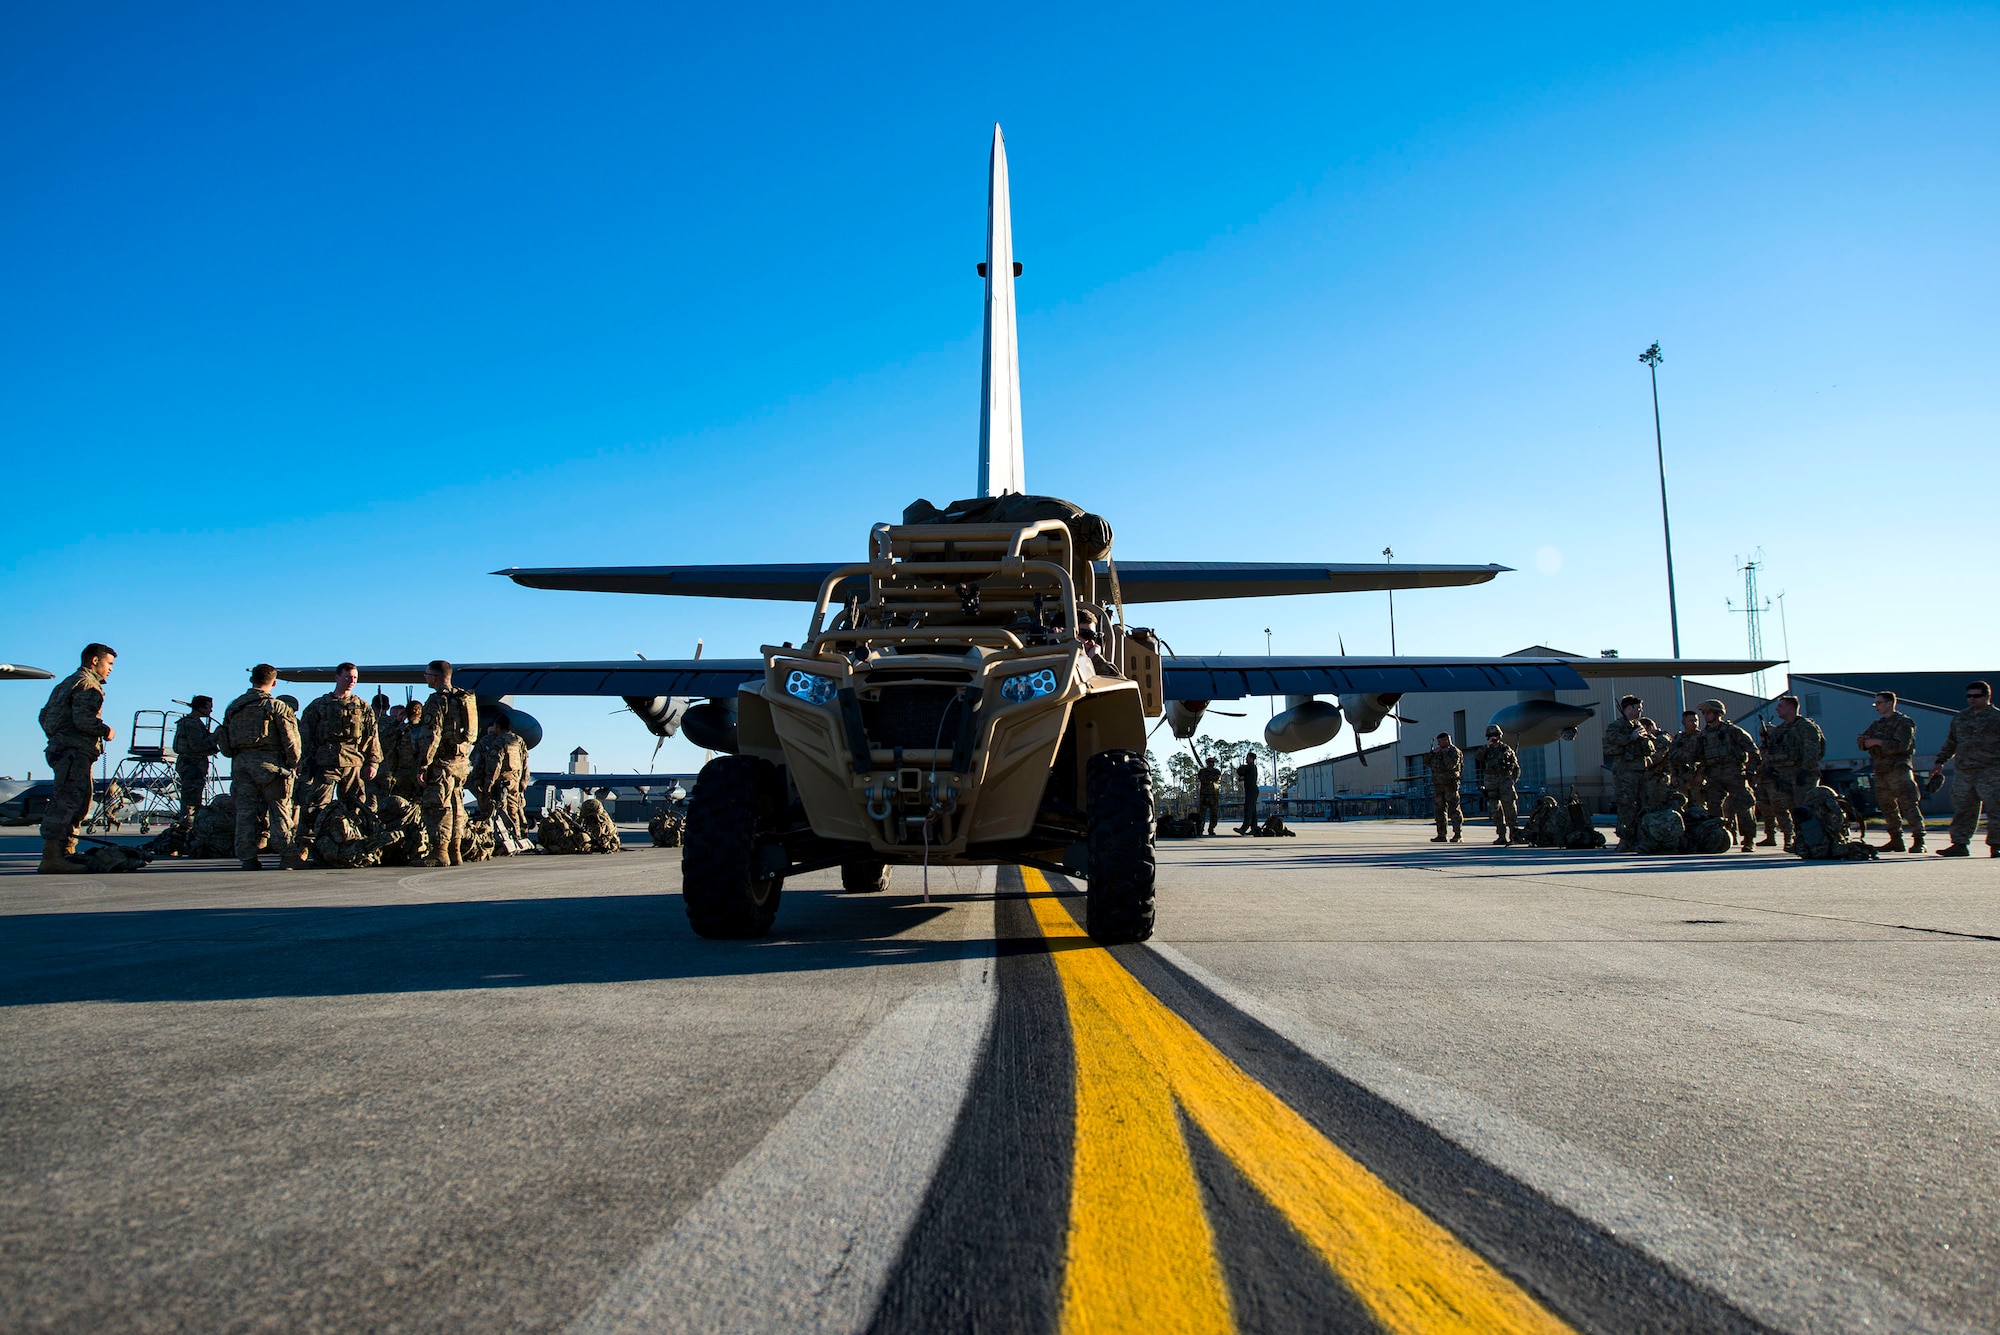 Airmen from the 823d Base Defense Squadron (BDS) prepare to board an HC-130J Combat King II during airfield security training, Jan. 28, 2019, at Moody Air Force Base, Ga. The training was geared toward bolstering the 823d BDS’s adaptive base readiness, which consisted of improving Airmen’s capabilities to effectively and efficiently on-load equipment along with more than 30 fully-equipped personnel into an aircraft, followed by establishing airfield security. (U.S. Air Force photo by Airman 1st Class Erick Requadt)